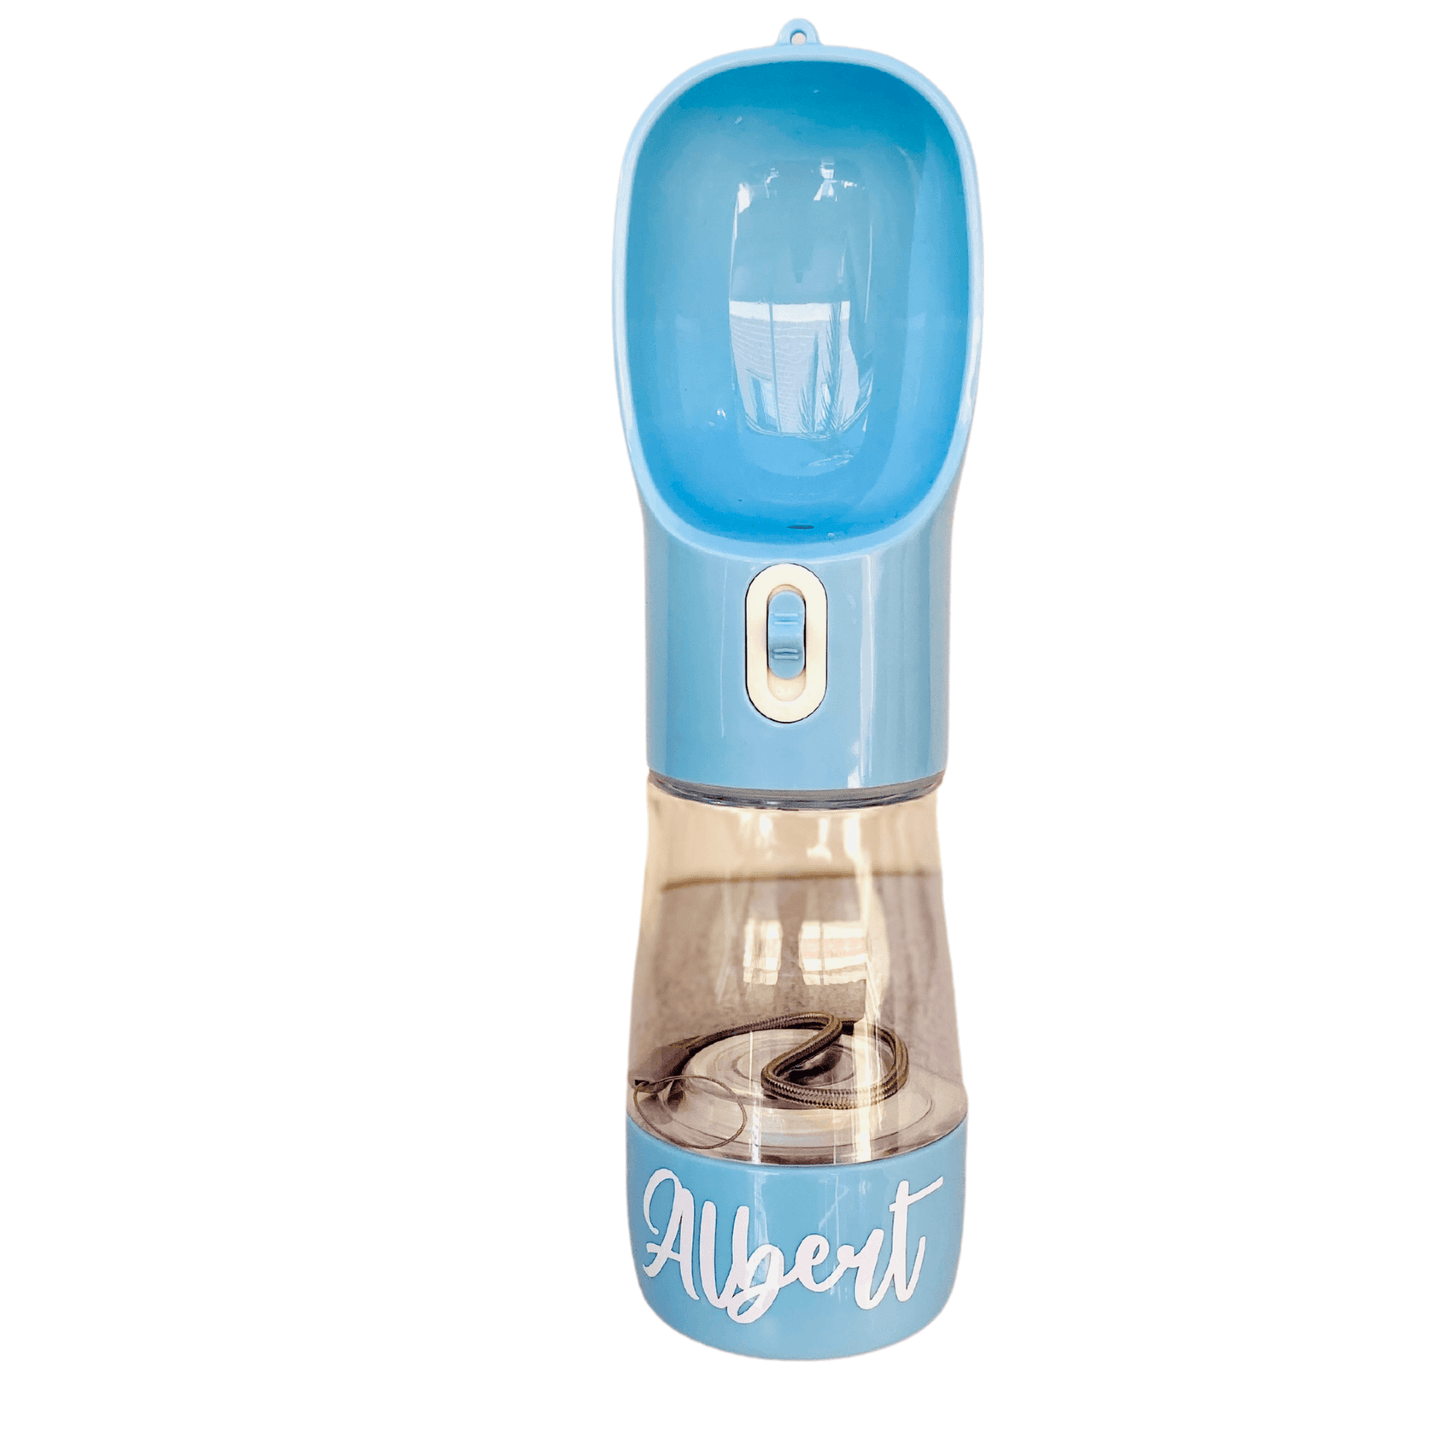 Dog travel treat and water bottle for your furbaby